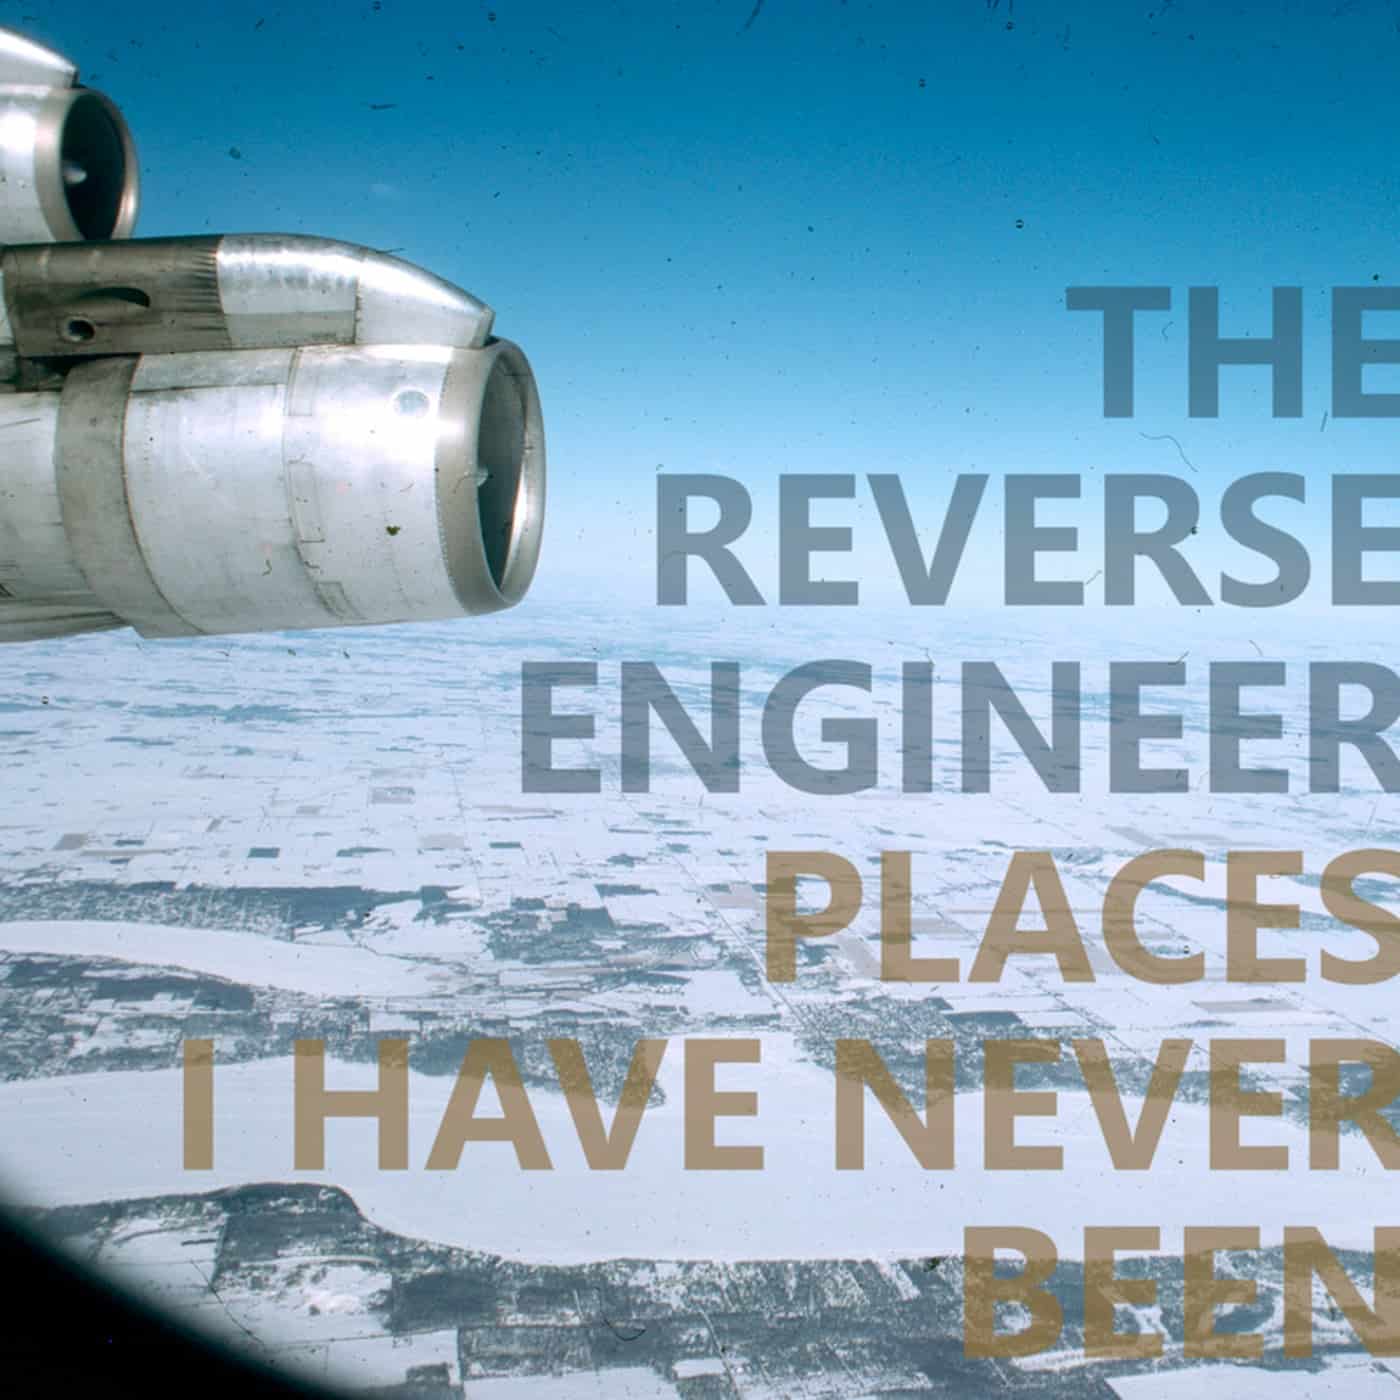 Download The Reverse Engineer - Places I Have Never Been on Electrobuzz